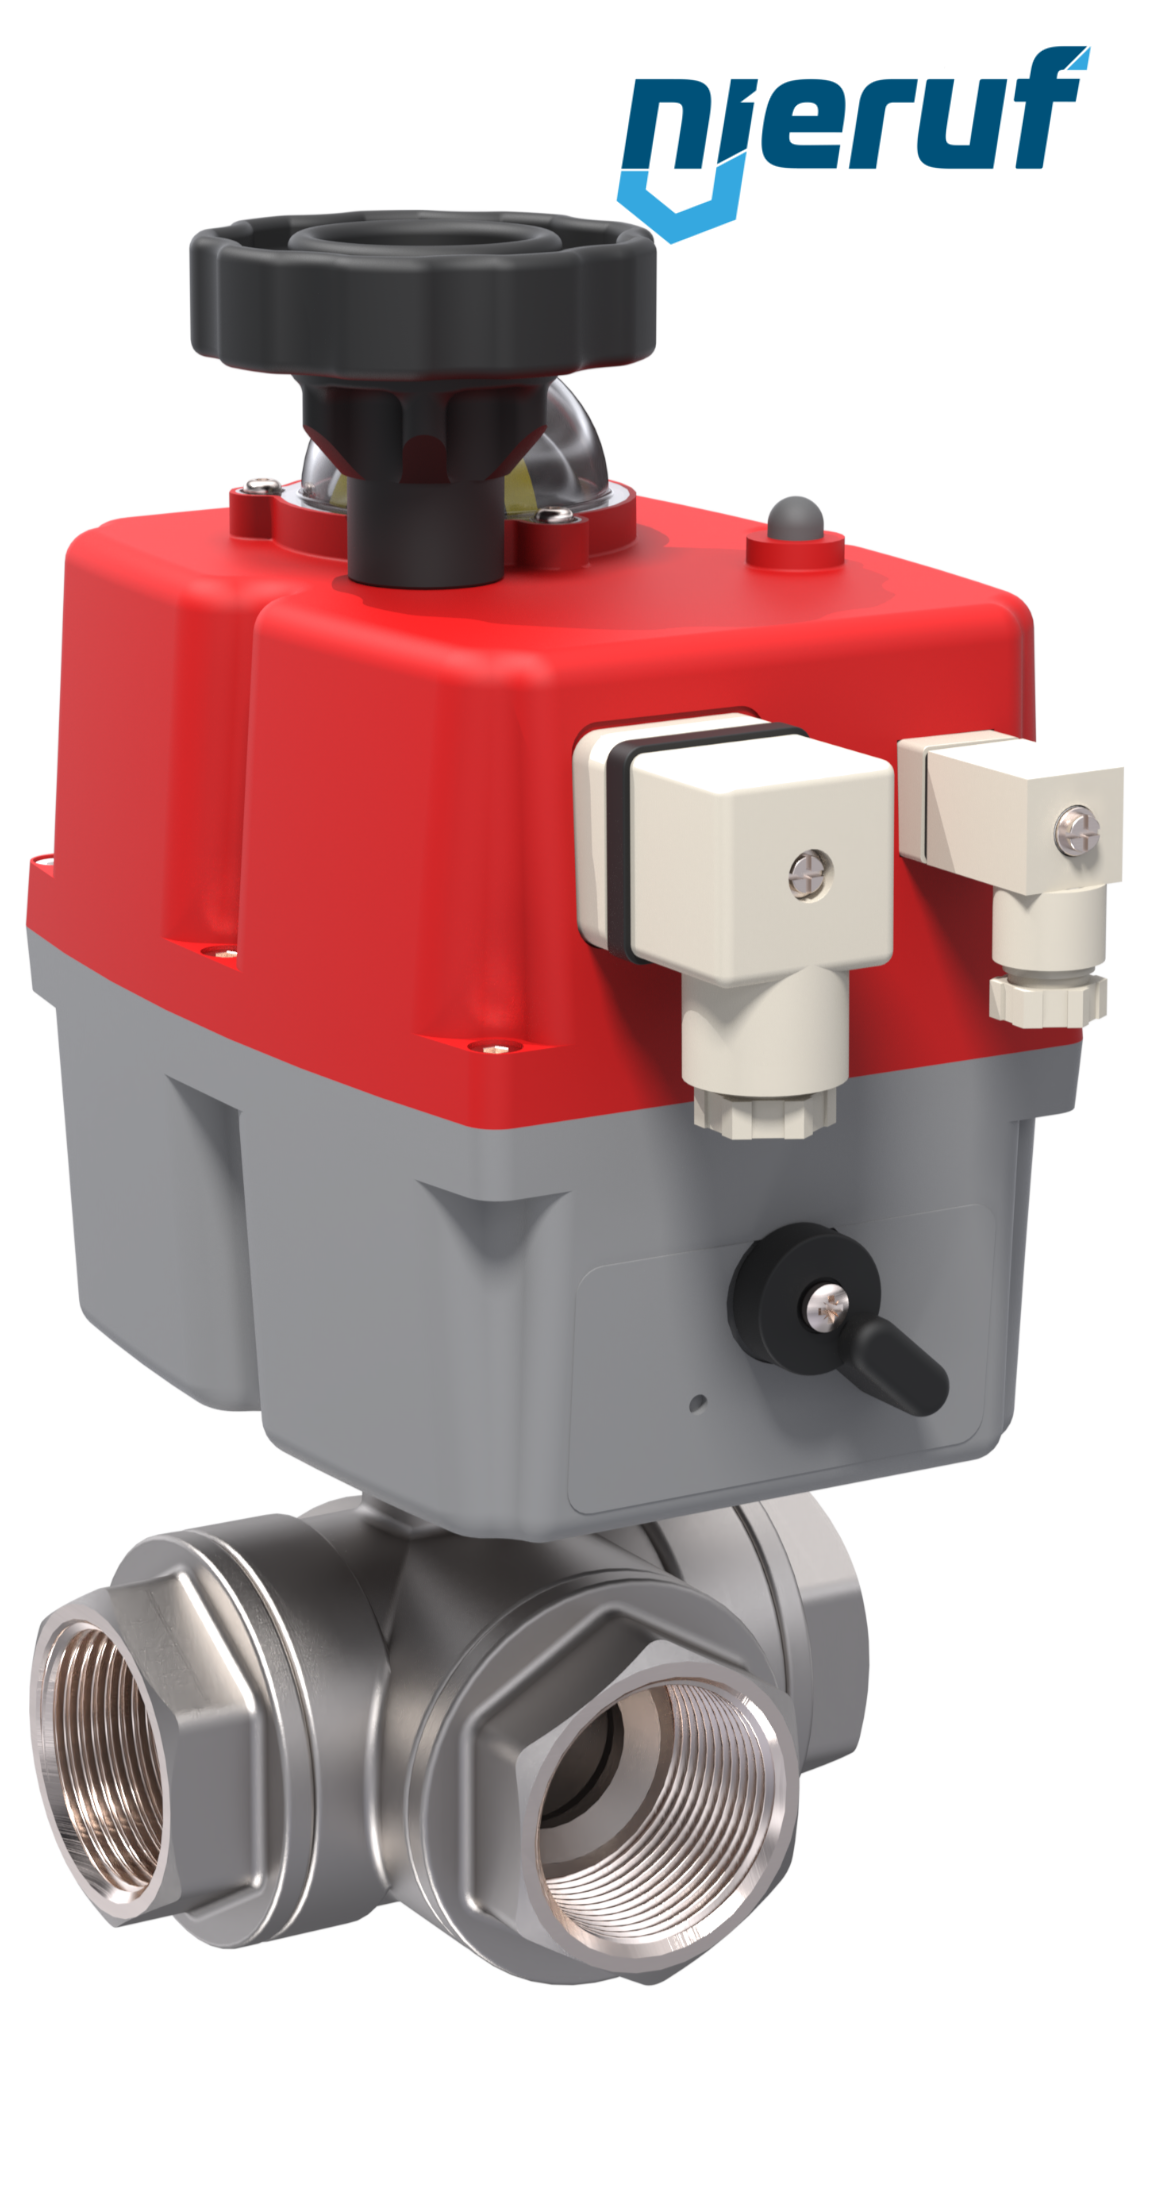 3 way automatic-ball valve 24-240V DN10 - 3/8" inch stainless steel reduced port design with T drilling